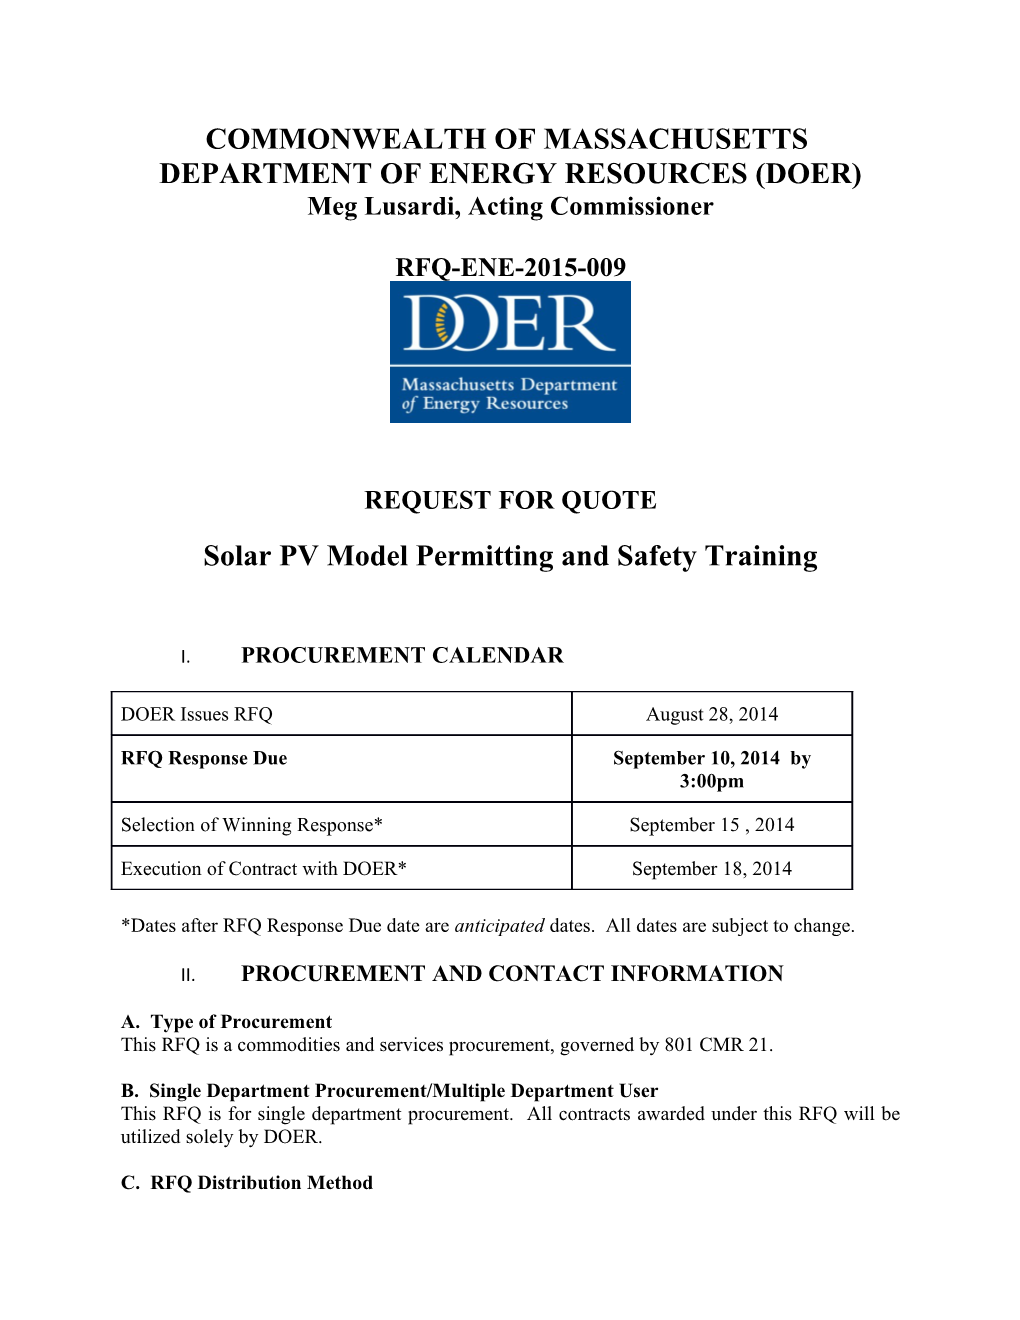 Department of Energy Resources (DOER)